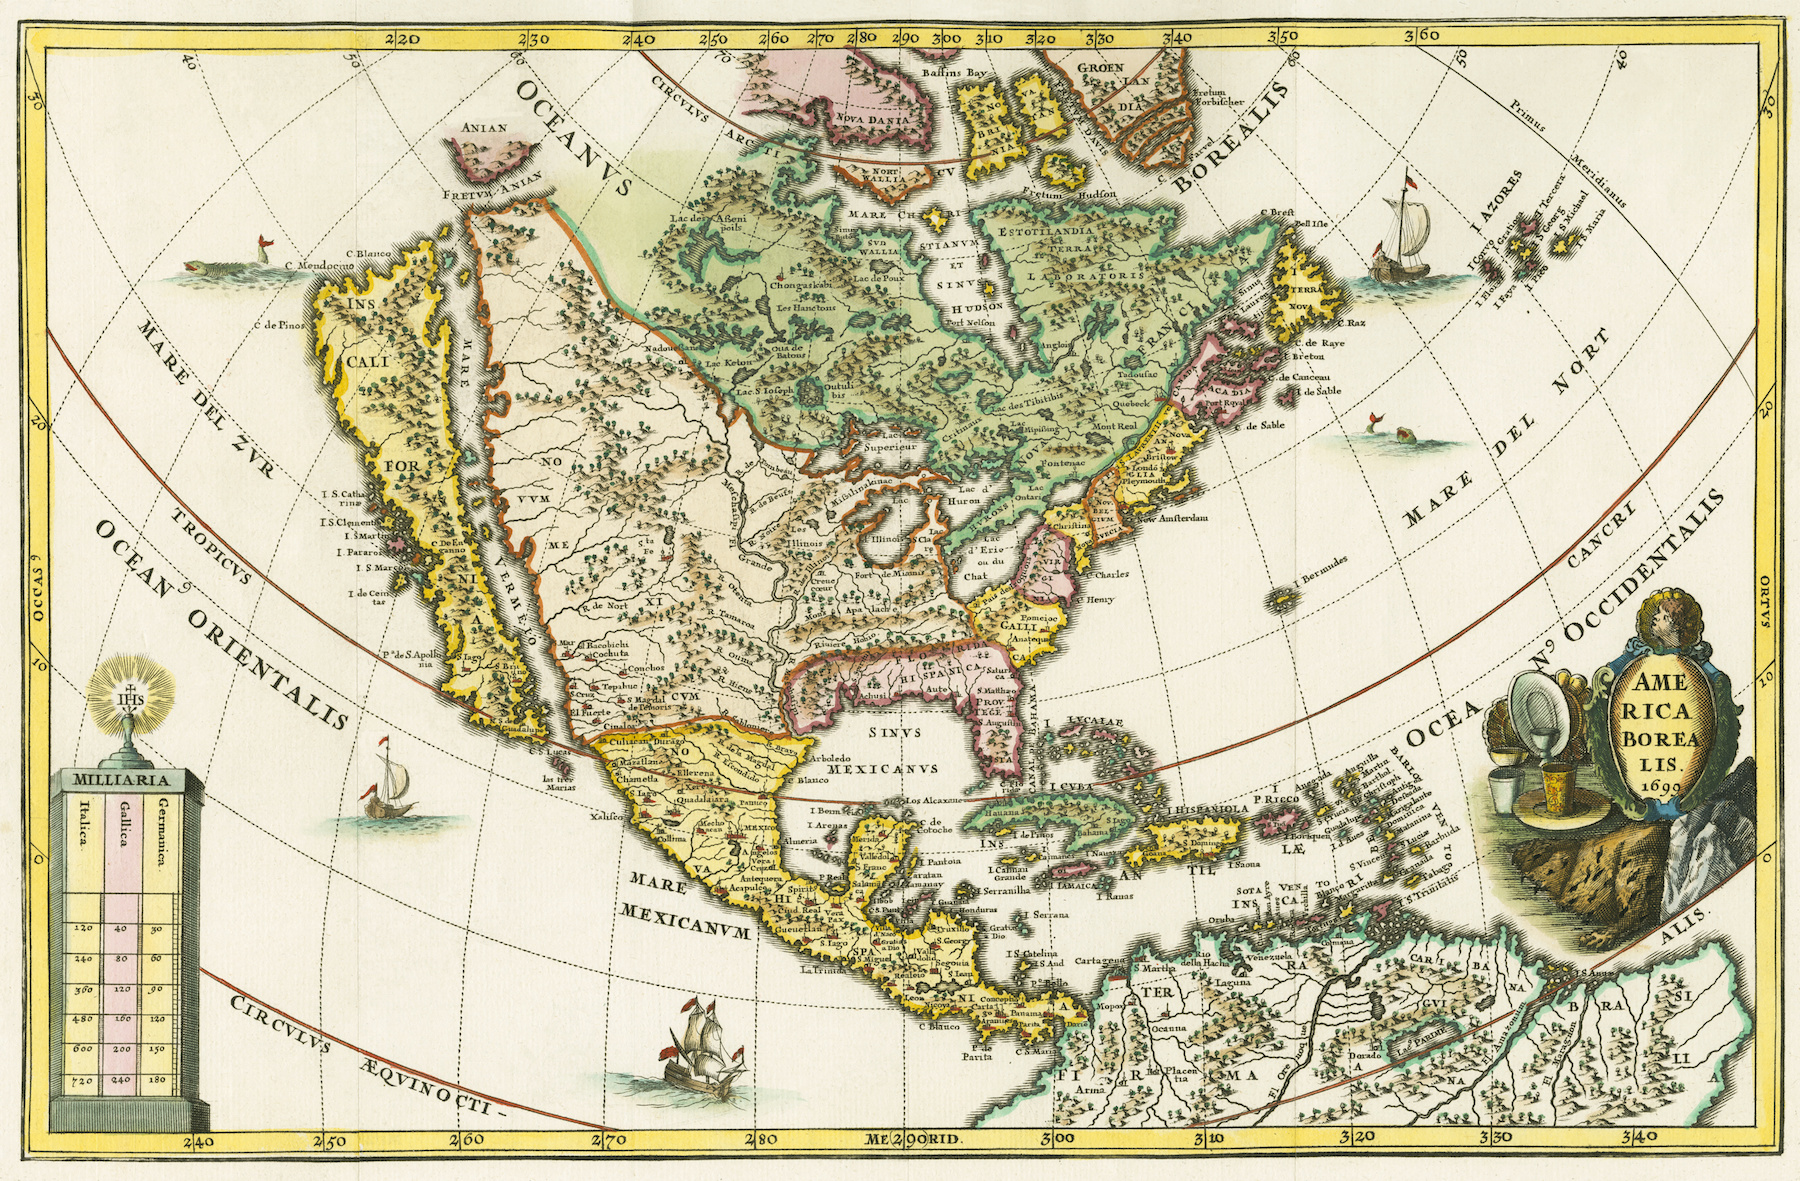 America borealis. Map of North America showing California as an island. From Heinrich Scherer's Geographia hierarchica, one of a seven volume set called Atlas Novus, first published between 1702 and 1710. The 180 maps in the collection were probably prepared around 1699-1700. This particular map is dated 1699 in the cartouche. (Photo by: Universal History Archive/UIG via Getty Images)